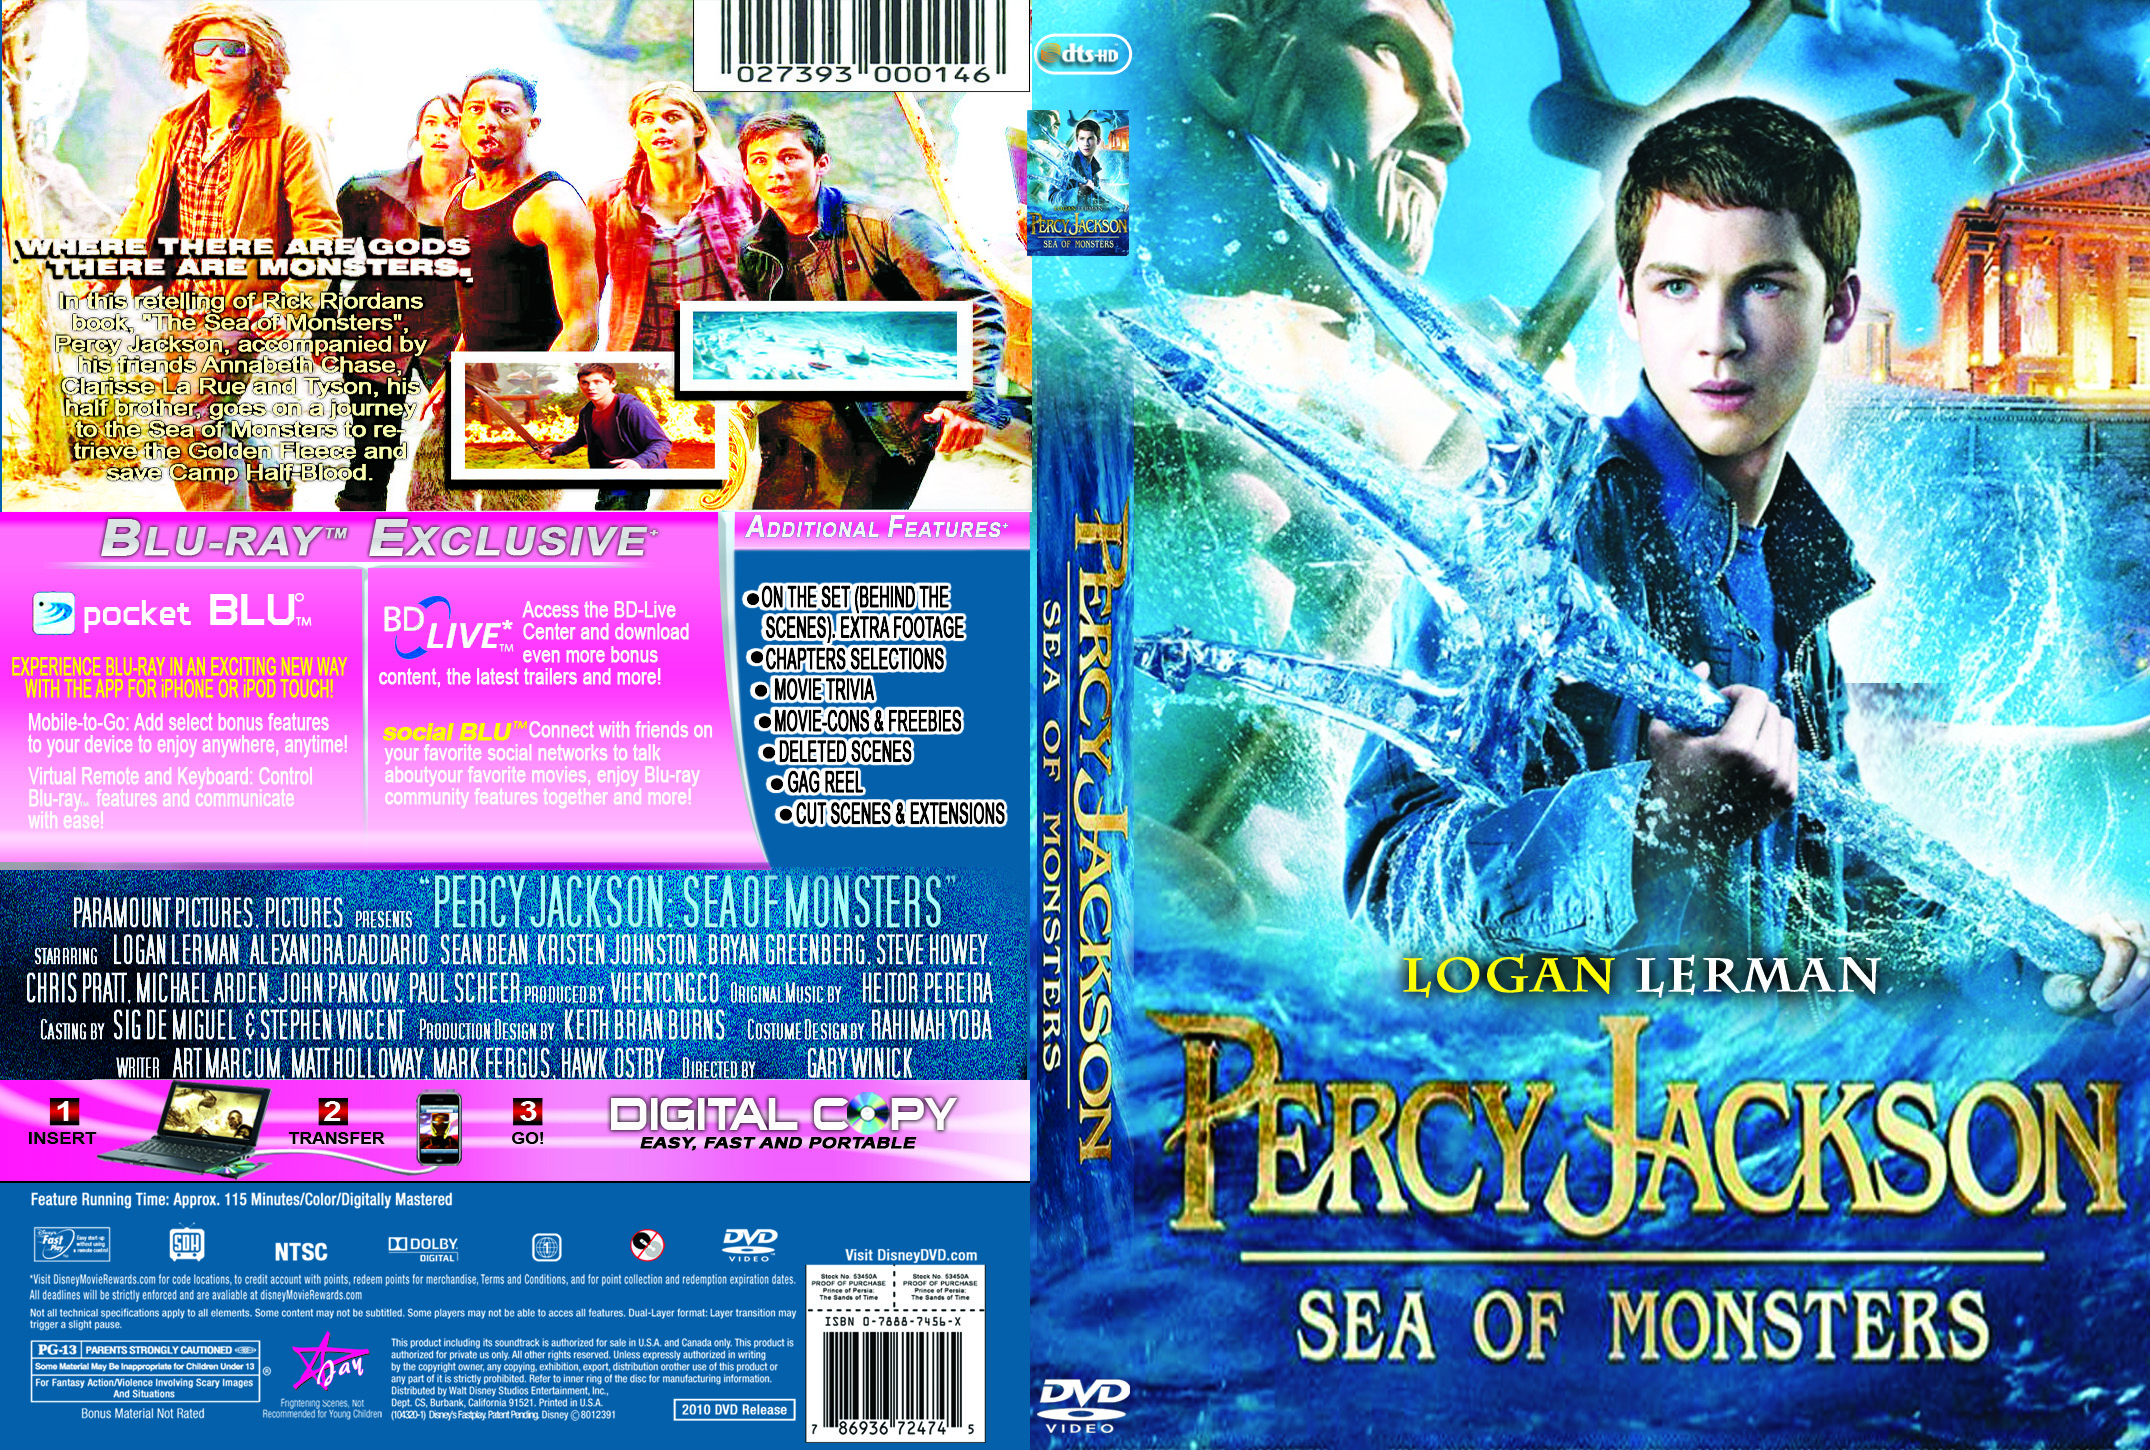 Covers Box Sk Percy Jackson Sea Of Monsters High Quality Dvd.